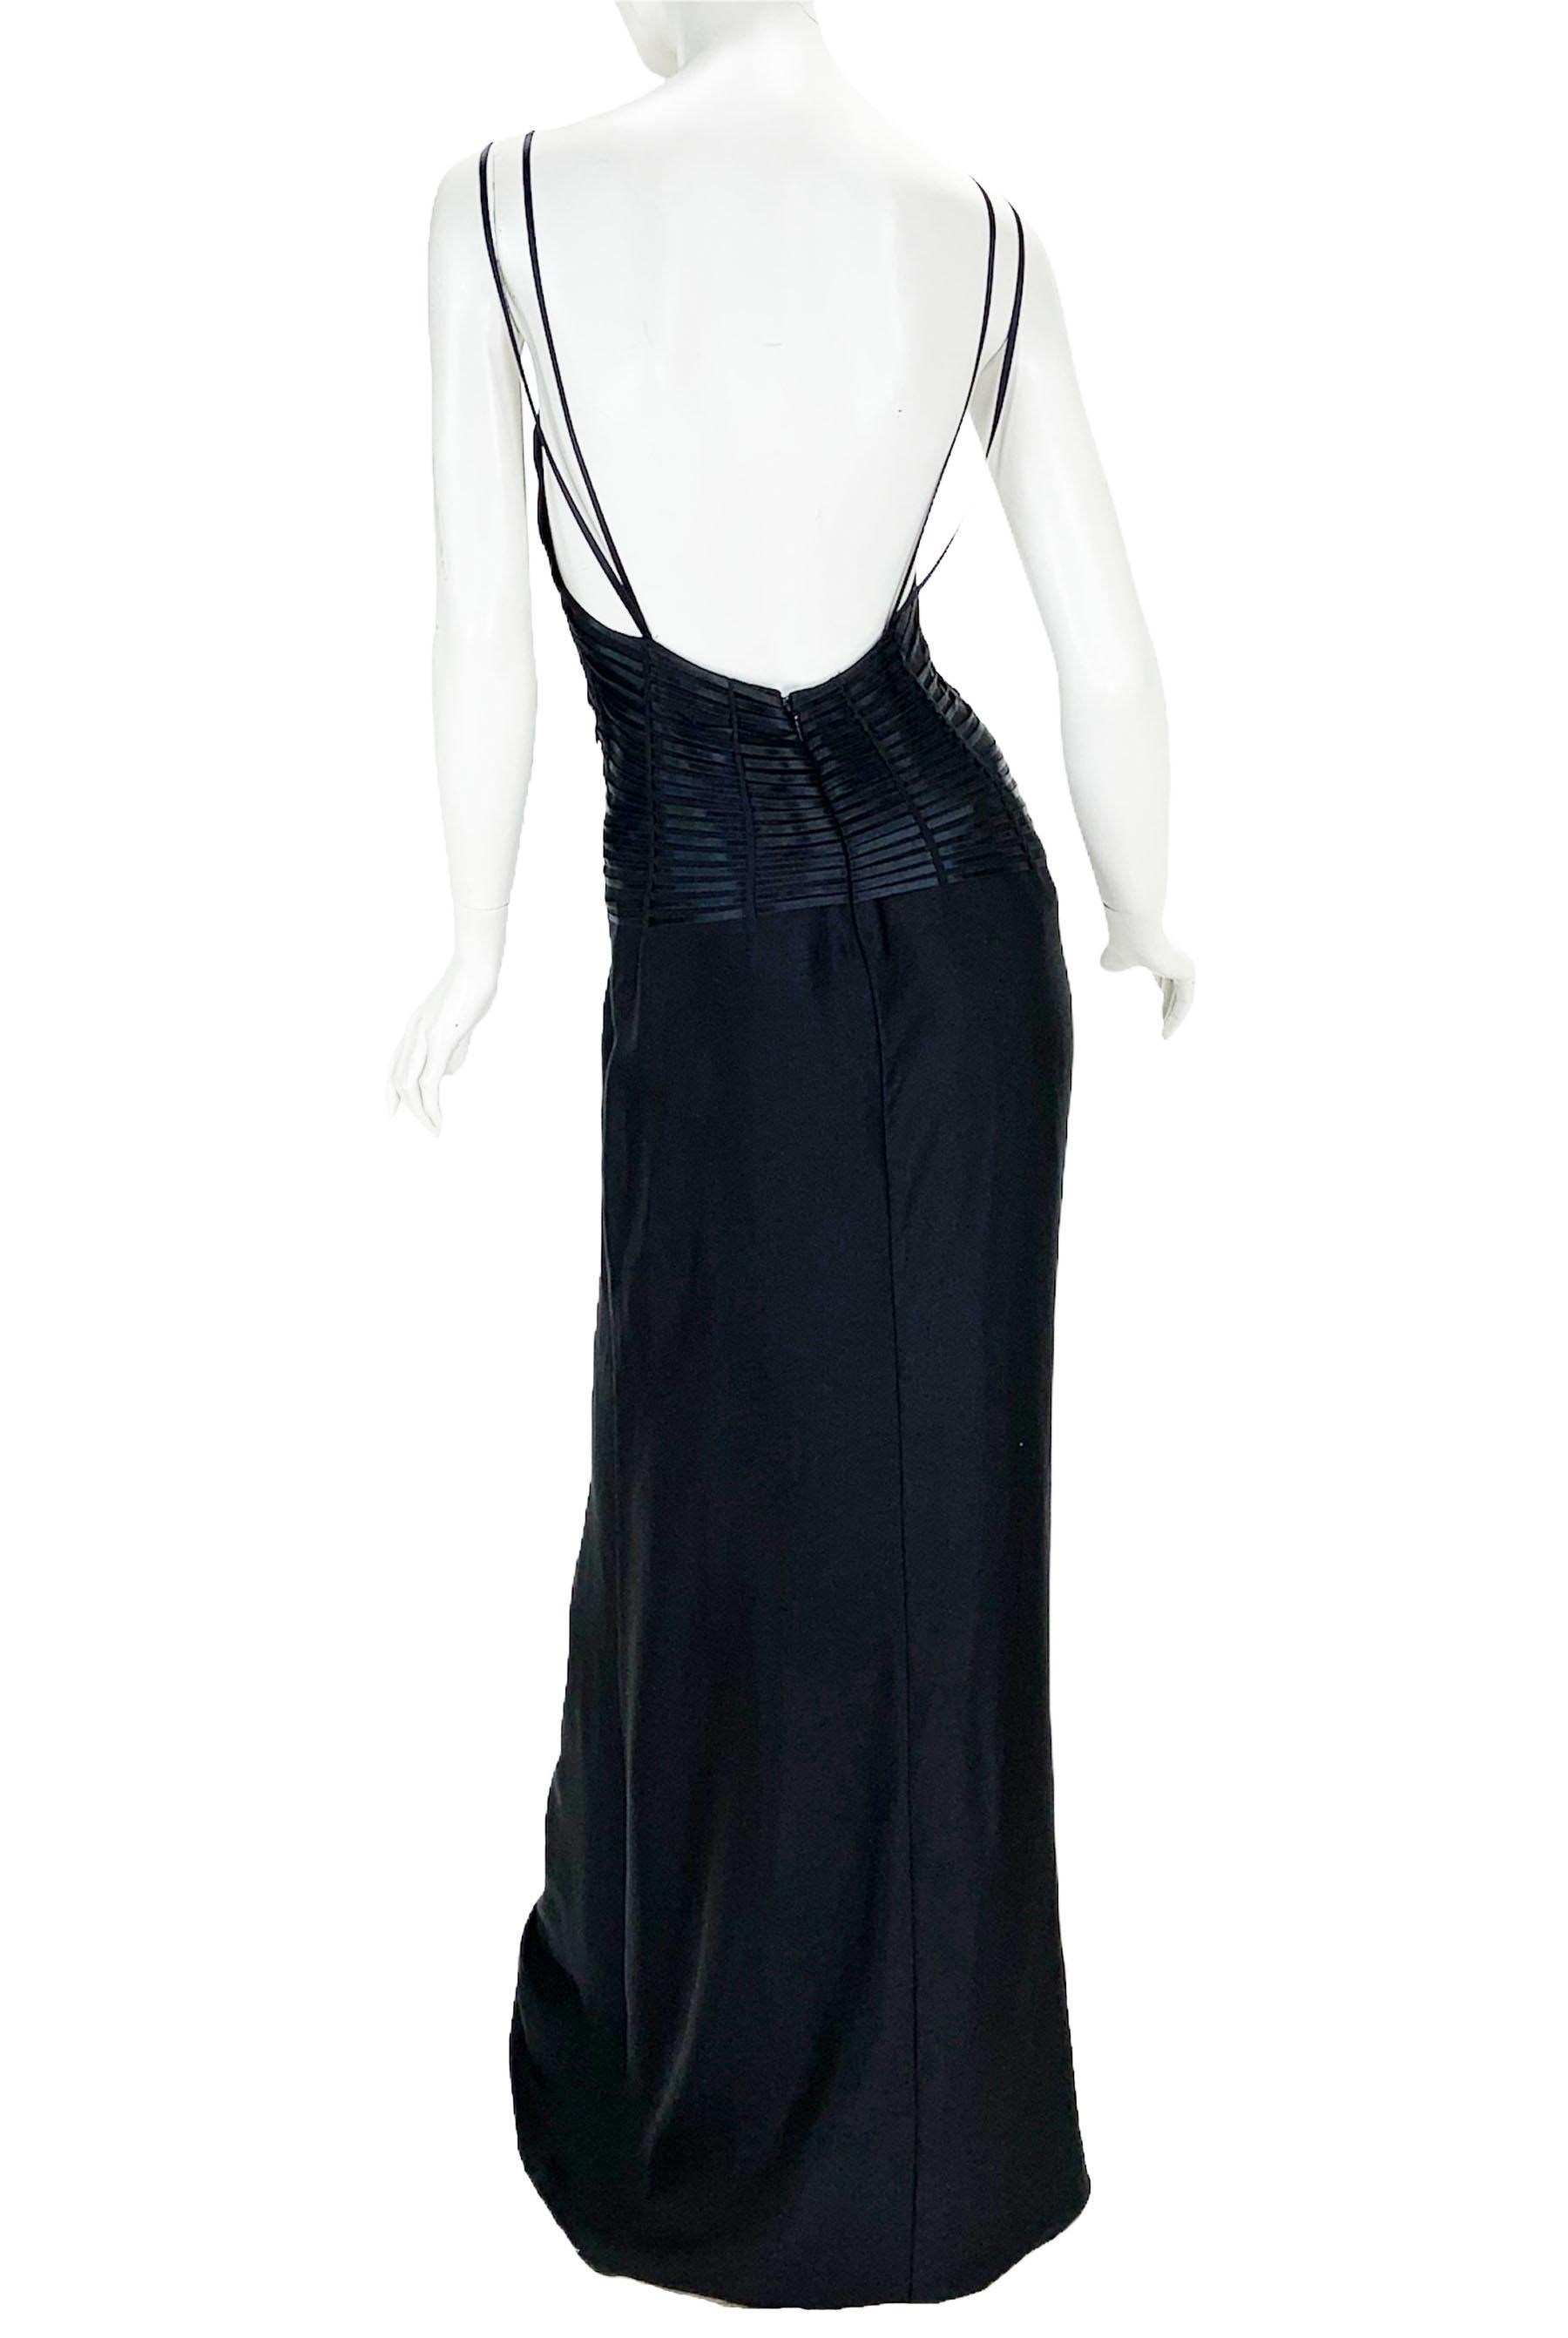 New Tom Ford for Gucci 2002 Collection Black Silk Deep Plunge Open Back Dress 44 For Sale 3